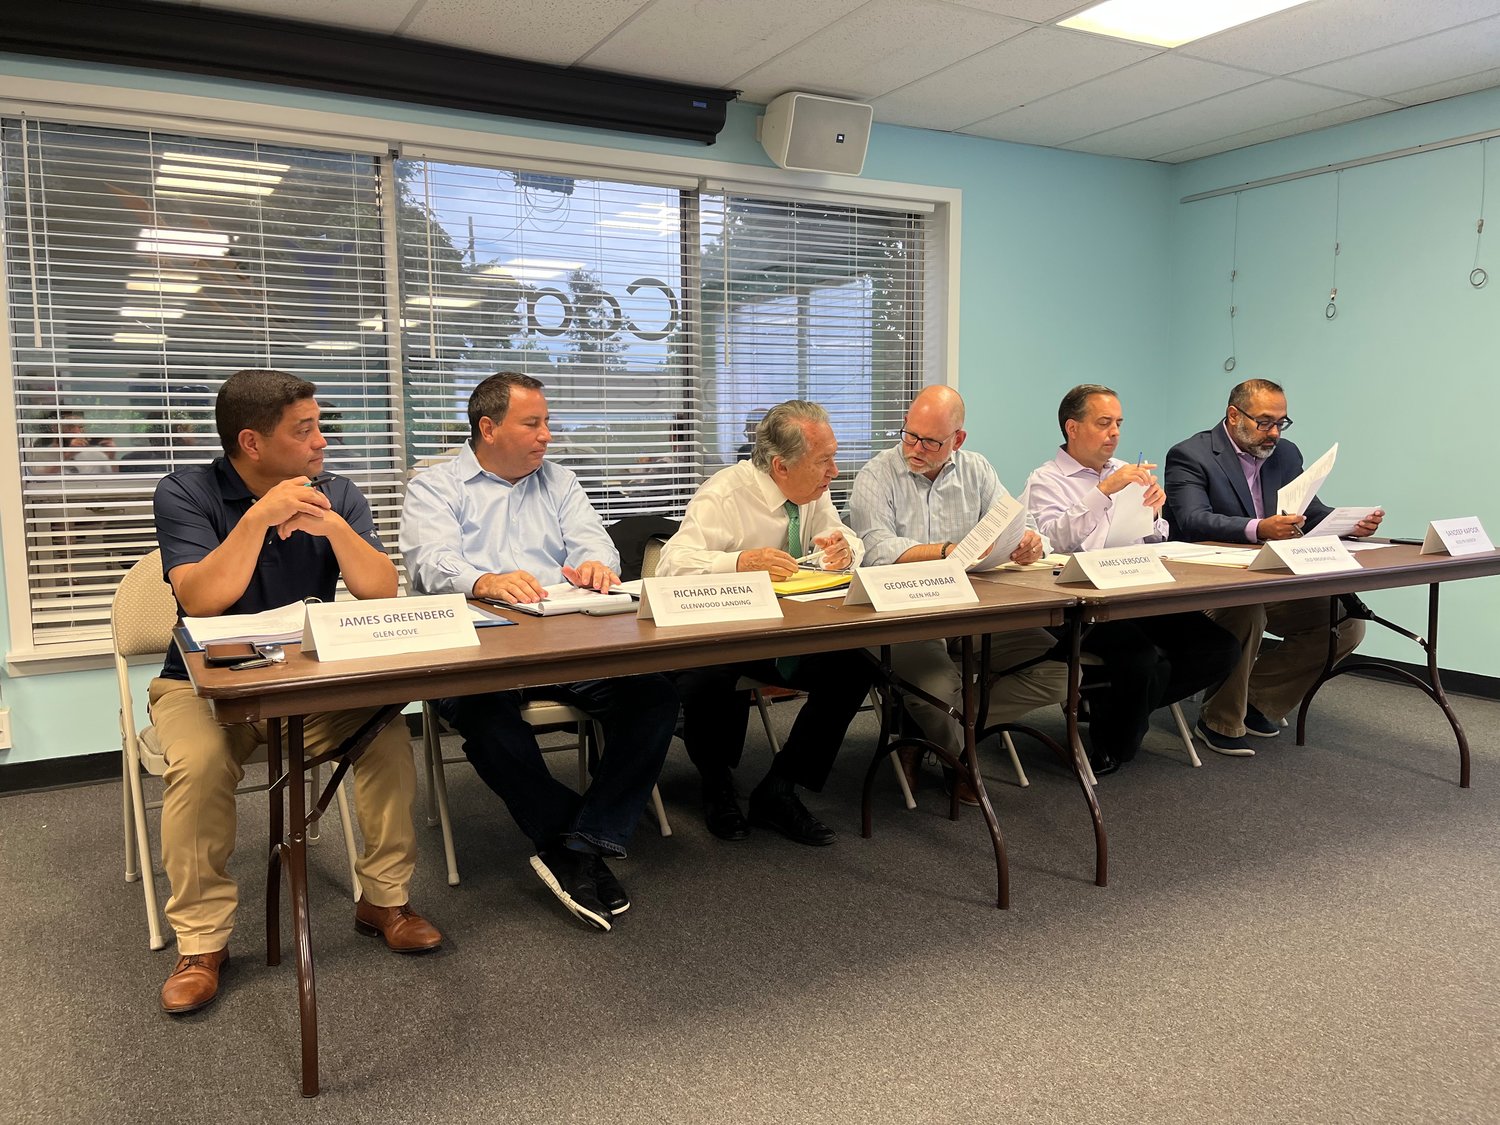 The North Shore Water Authority met on July 18 at the Gold Coast Public Library’s Annex, which will serve as the Authority’s meeting spot for the indefinite future.